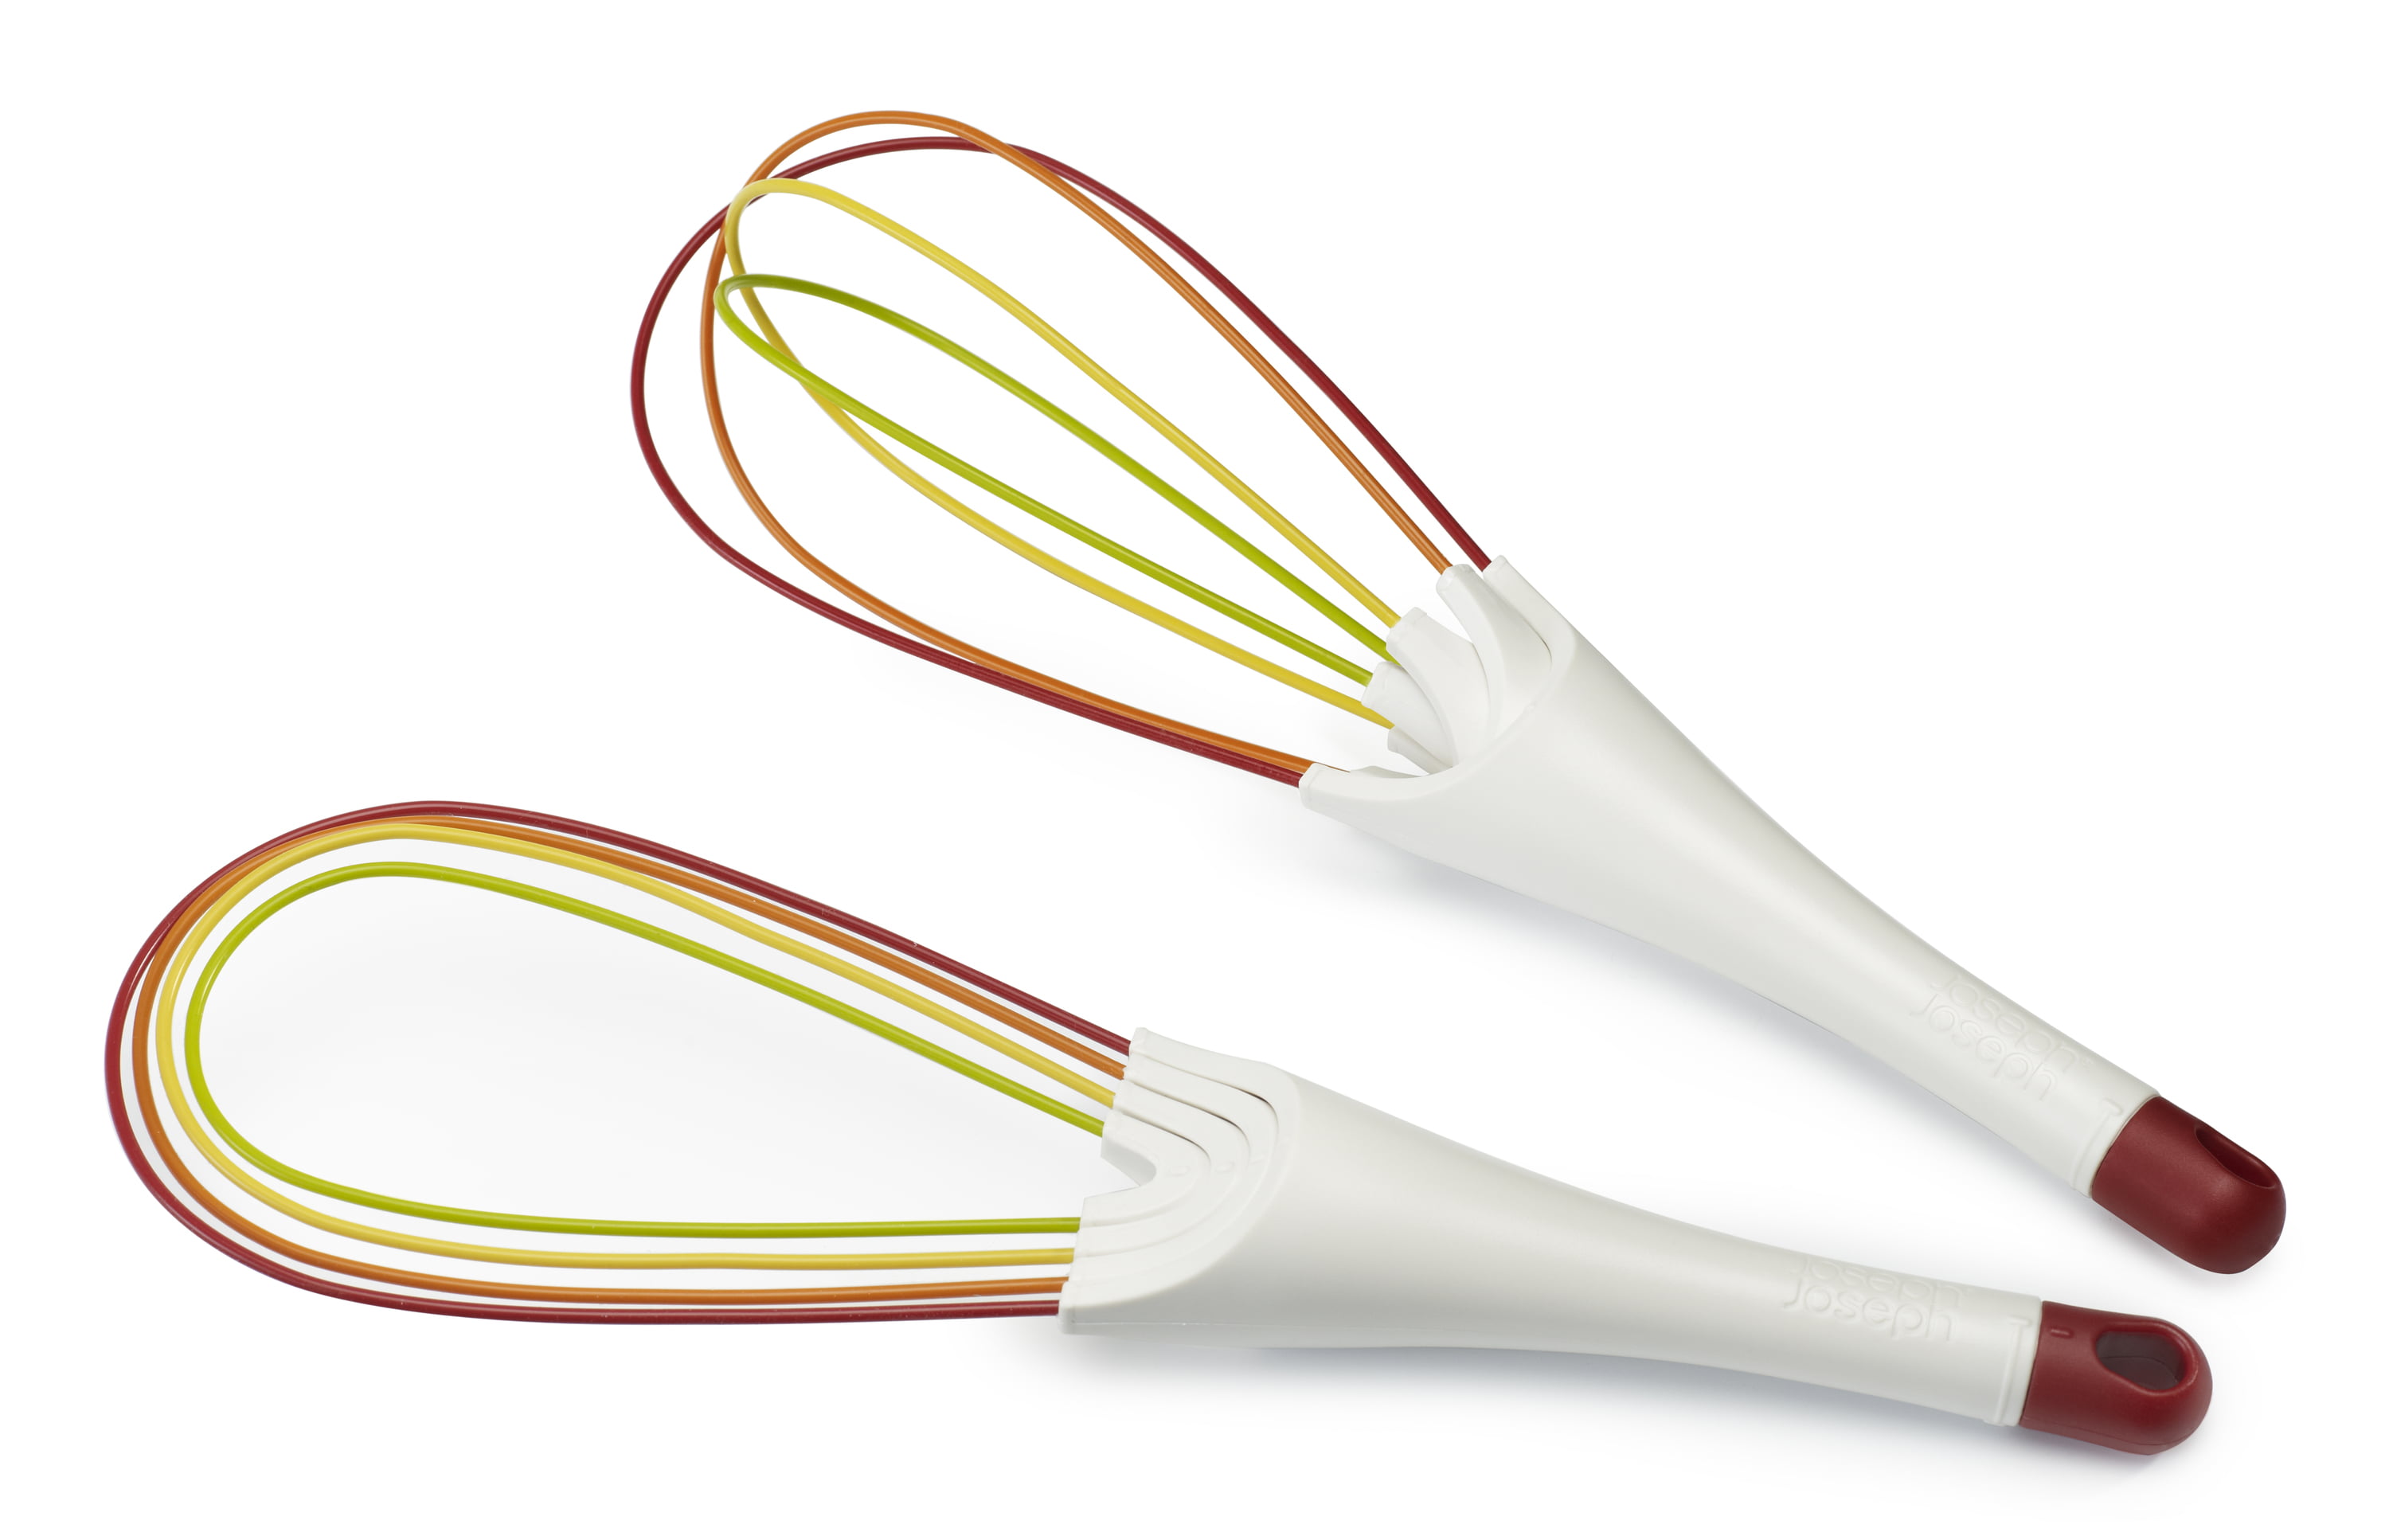 Joseph Joseph 20056 Whiskle 2-in-1 Whisk with Integrated Bowl Scraper,  Green – Nicole the Nomad